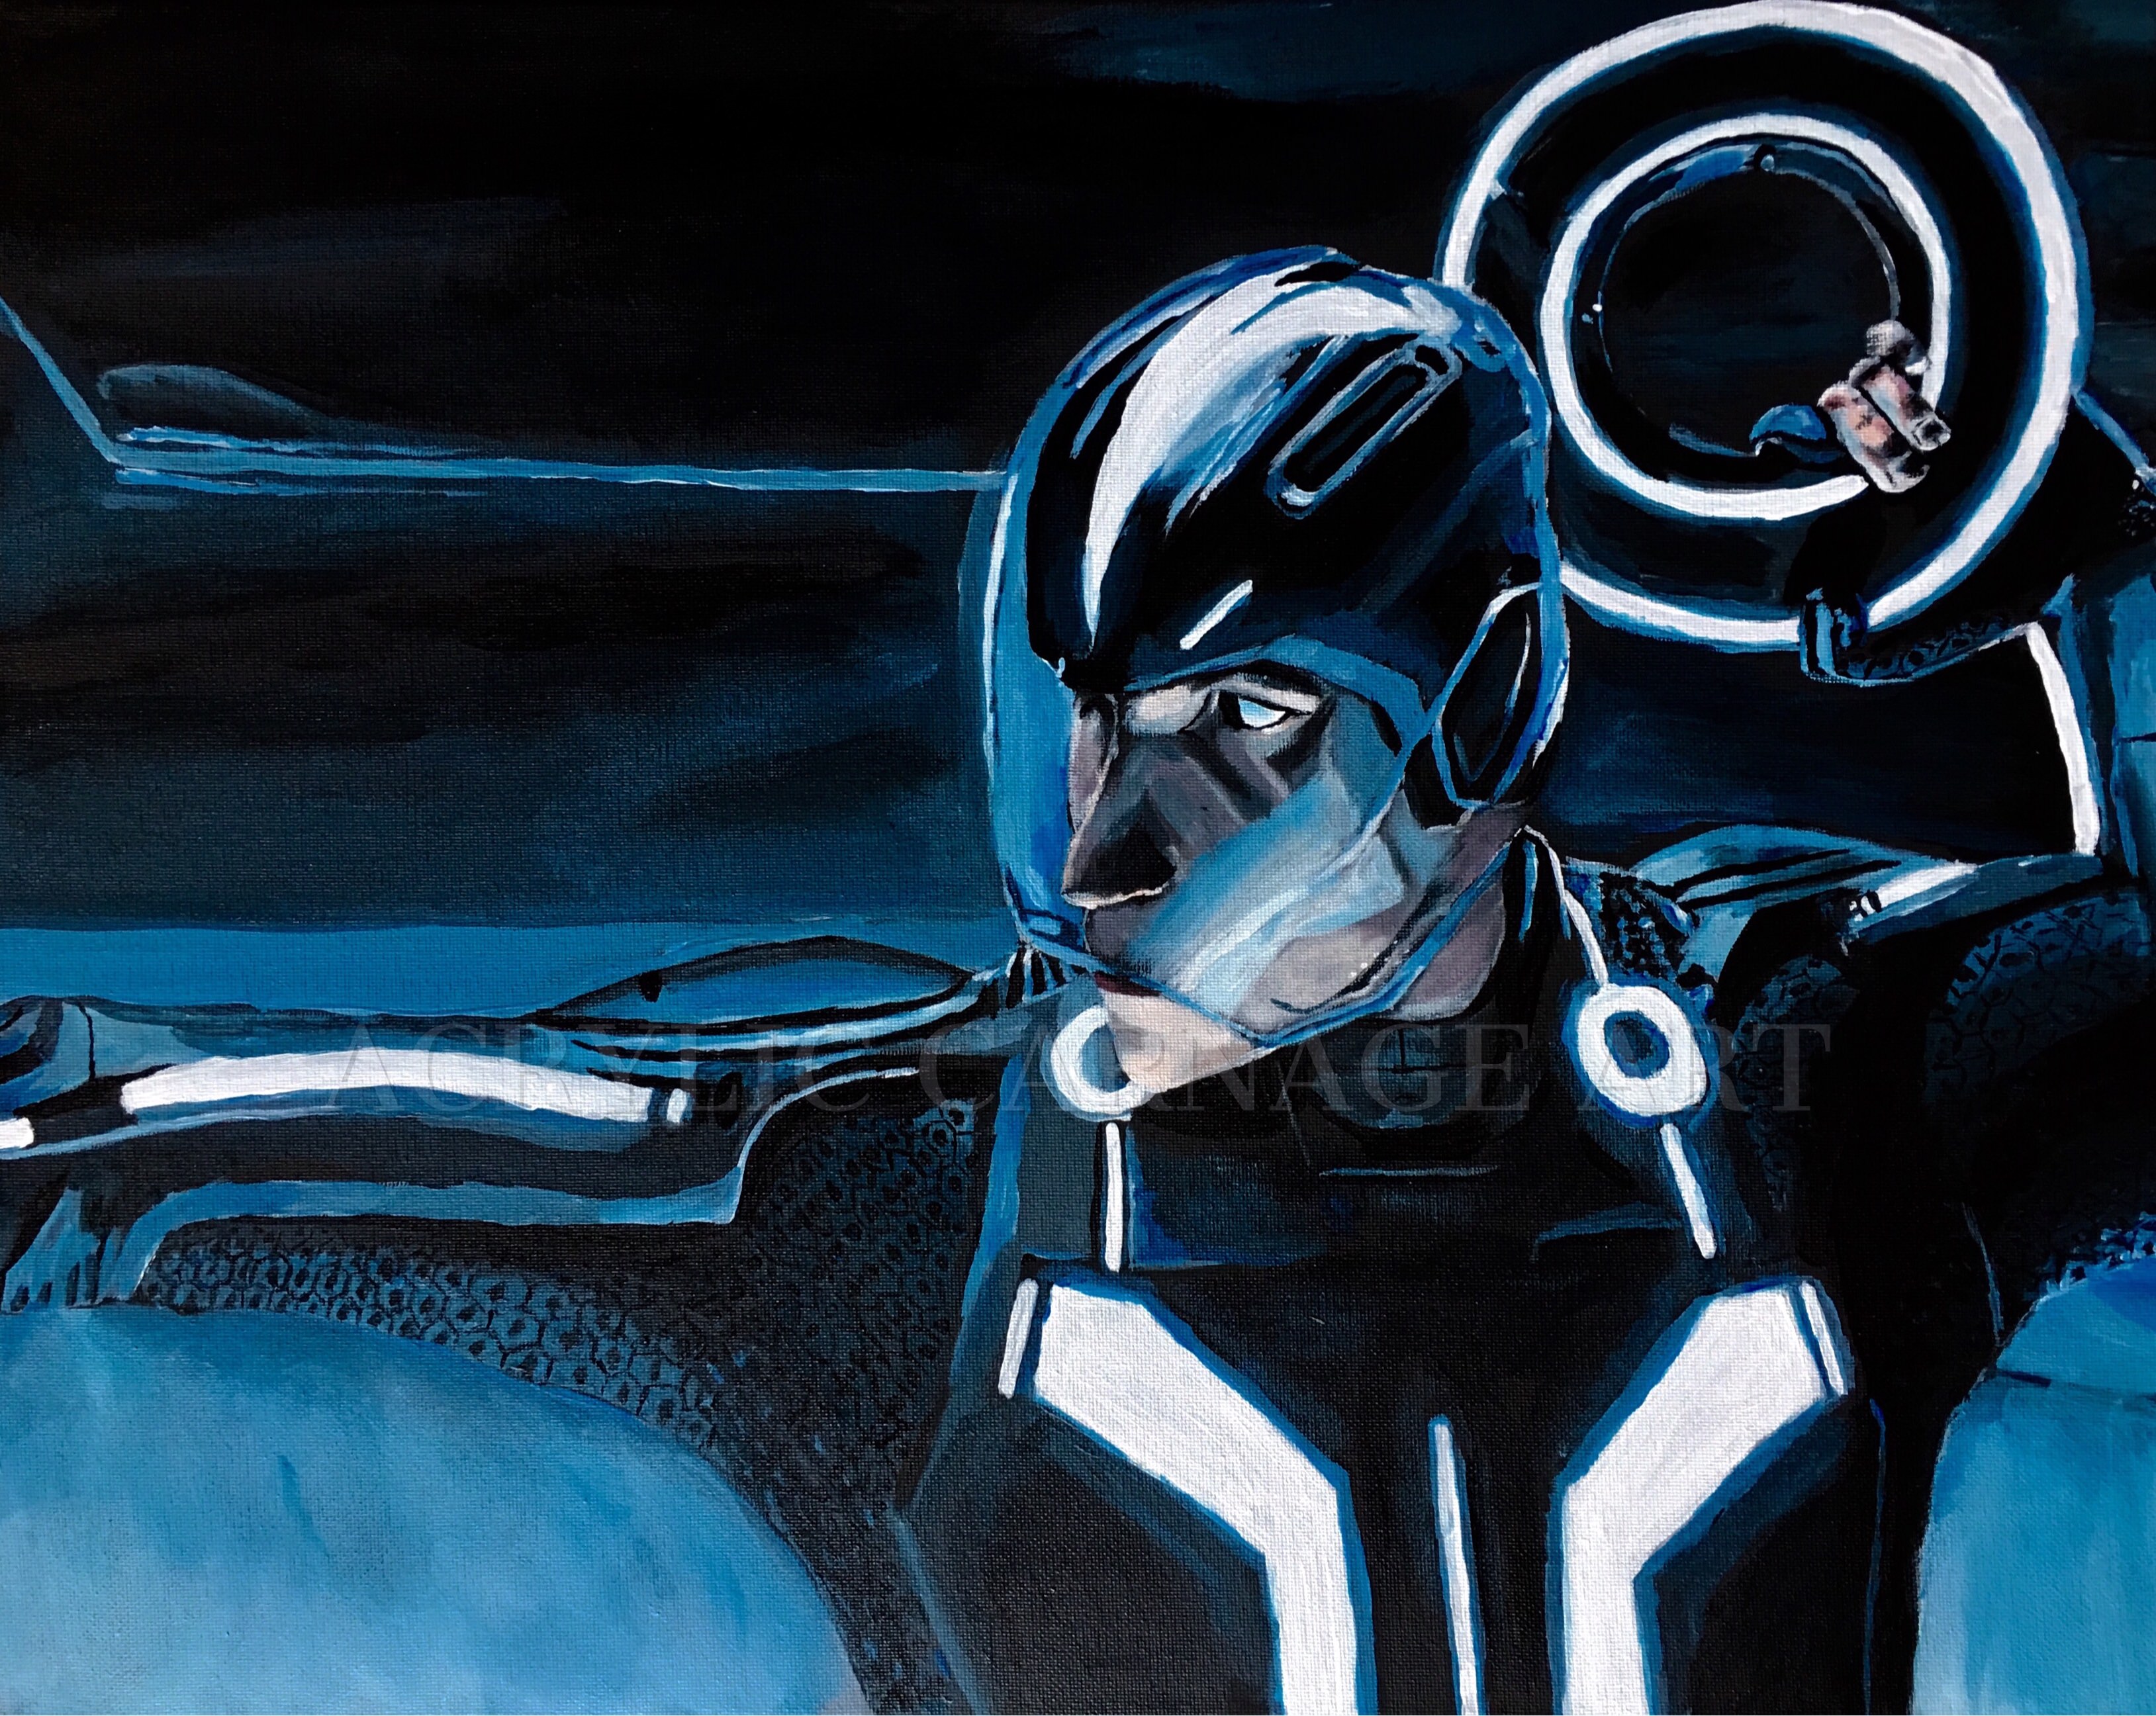 A painting I made of Sam Flynn from Tron Legacy. I am a big fan of the movie, visuals, and the soundtrack and hope that we get a sequel one day. Until